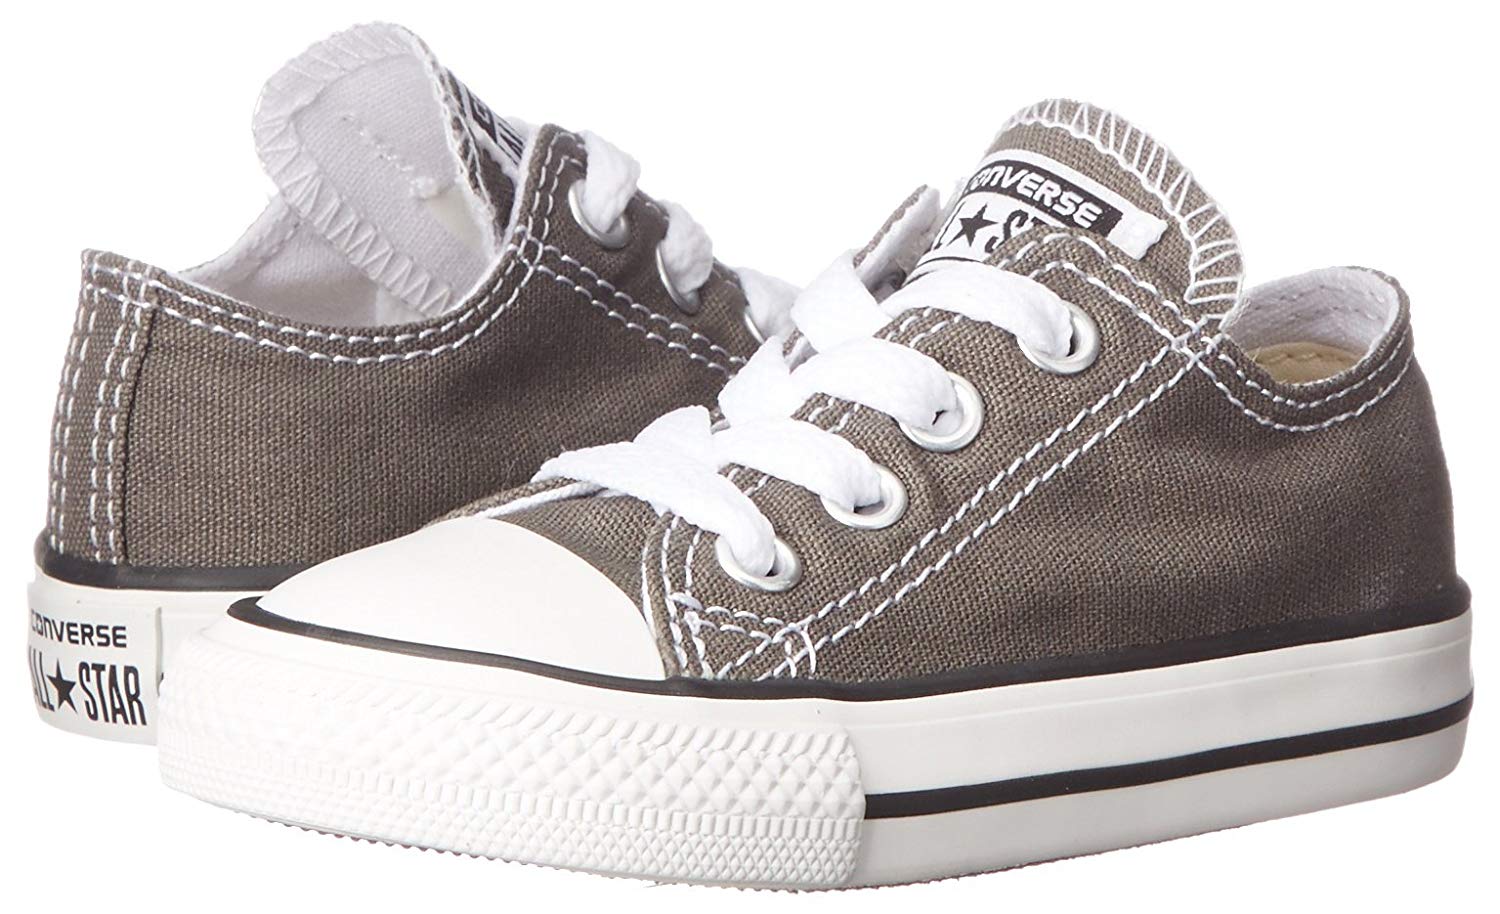 Converse Kids’ Chuck Taylor All Star Canvas Low Top Sneaker